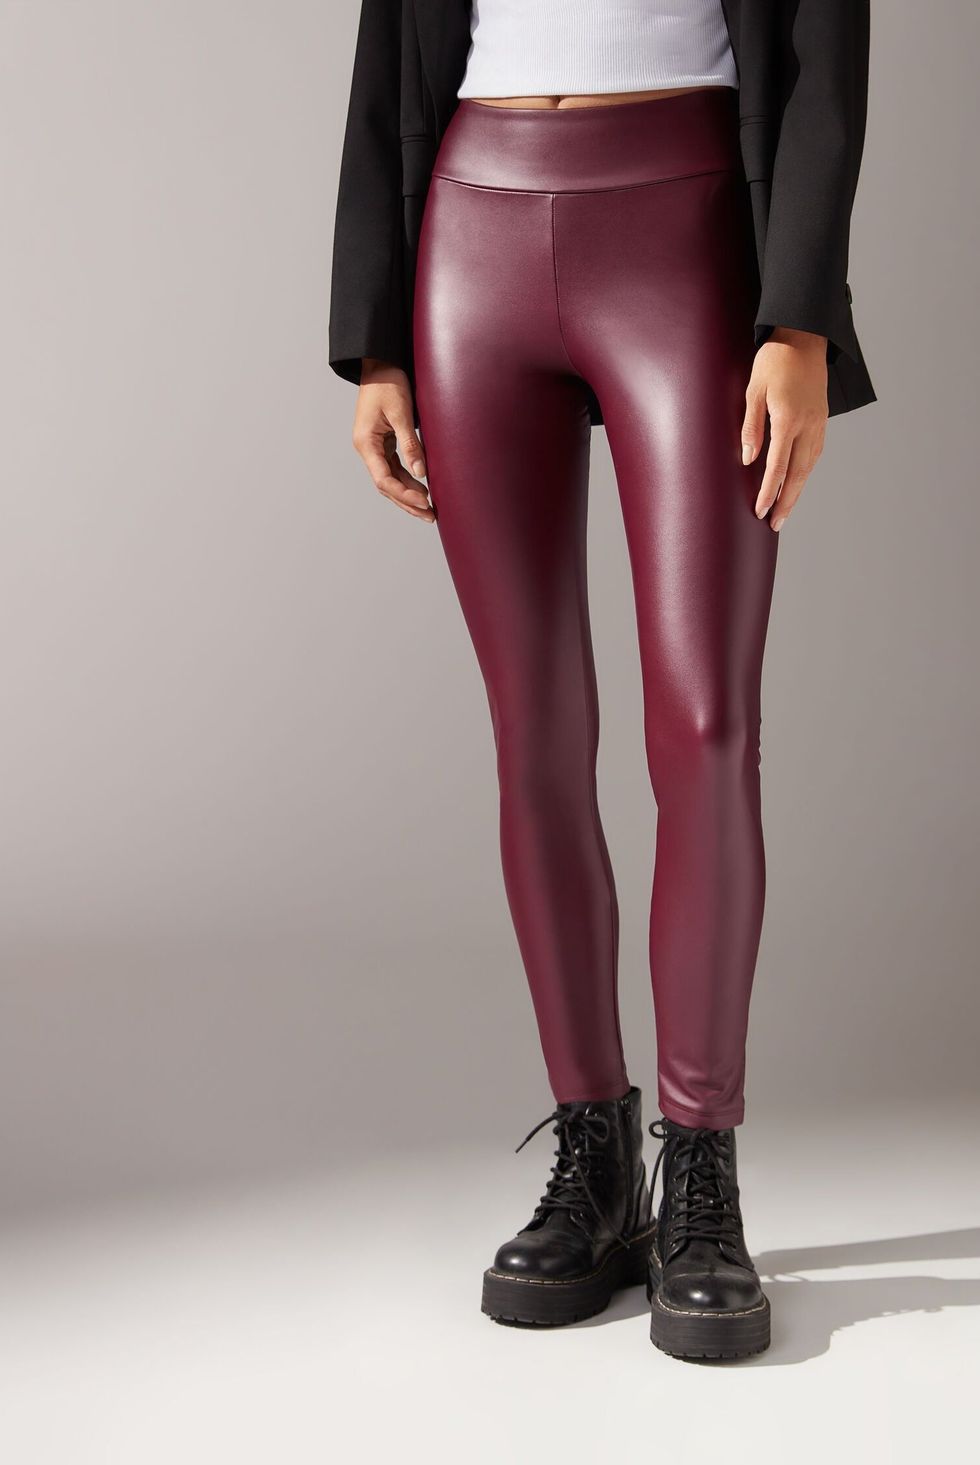 CALZEDONIA women's mid-waist slim leather pants tight and